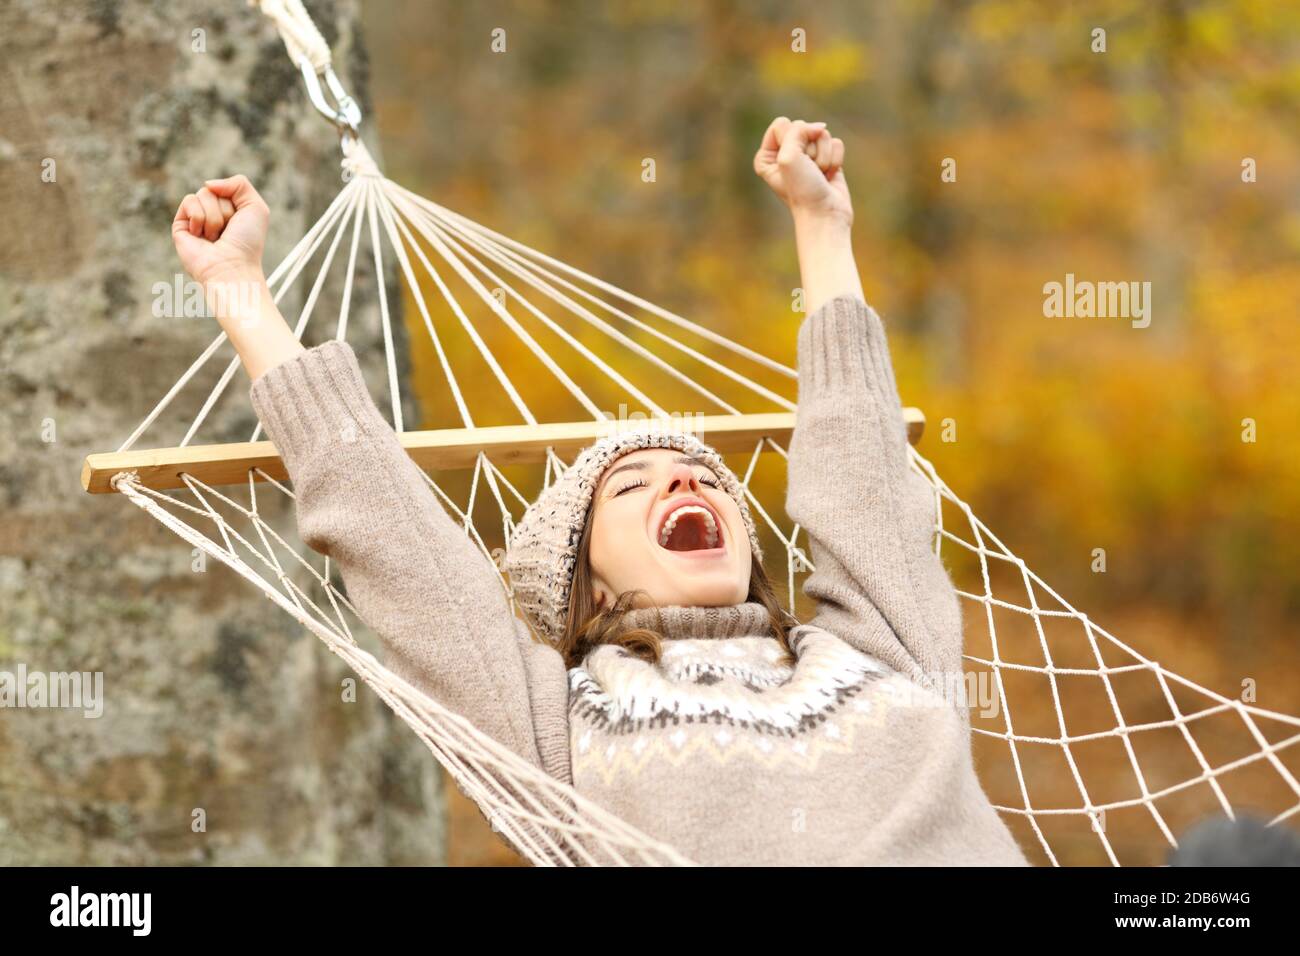 Excited woman celebrating holidays raising arms lying on hammock in autumn in a forest Stock Photo